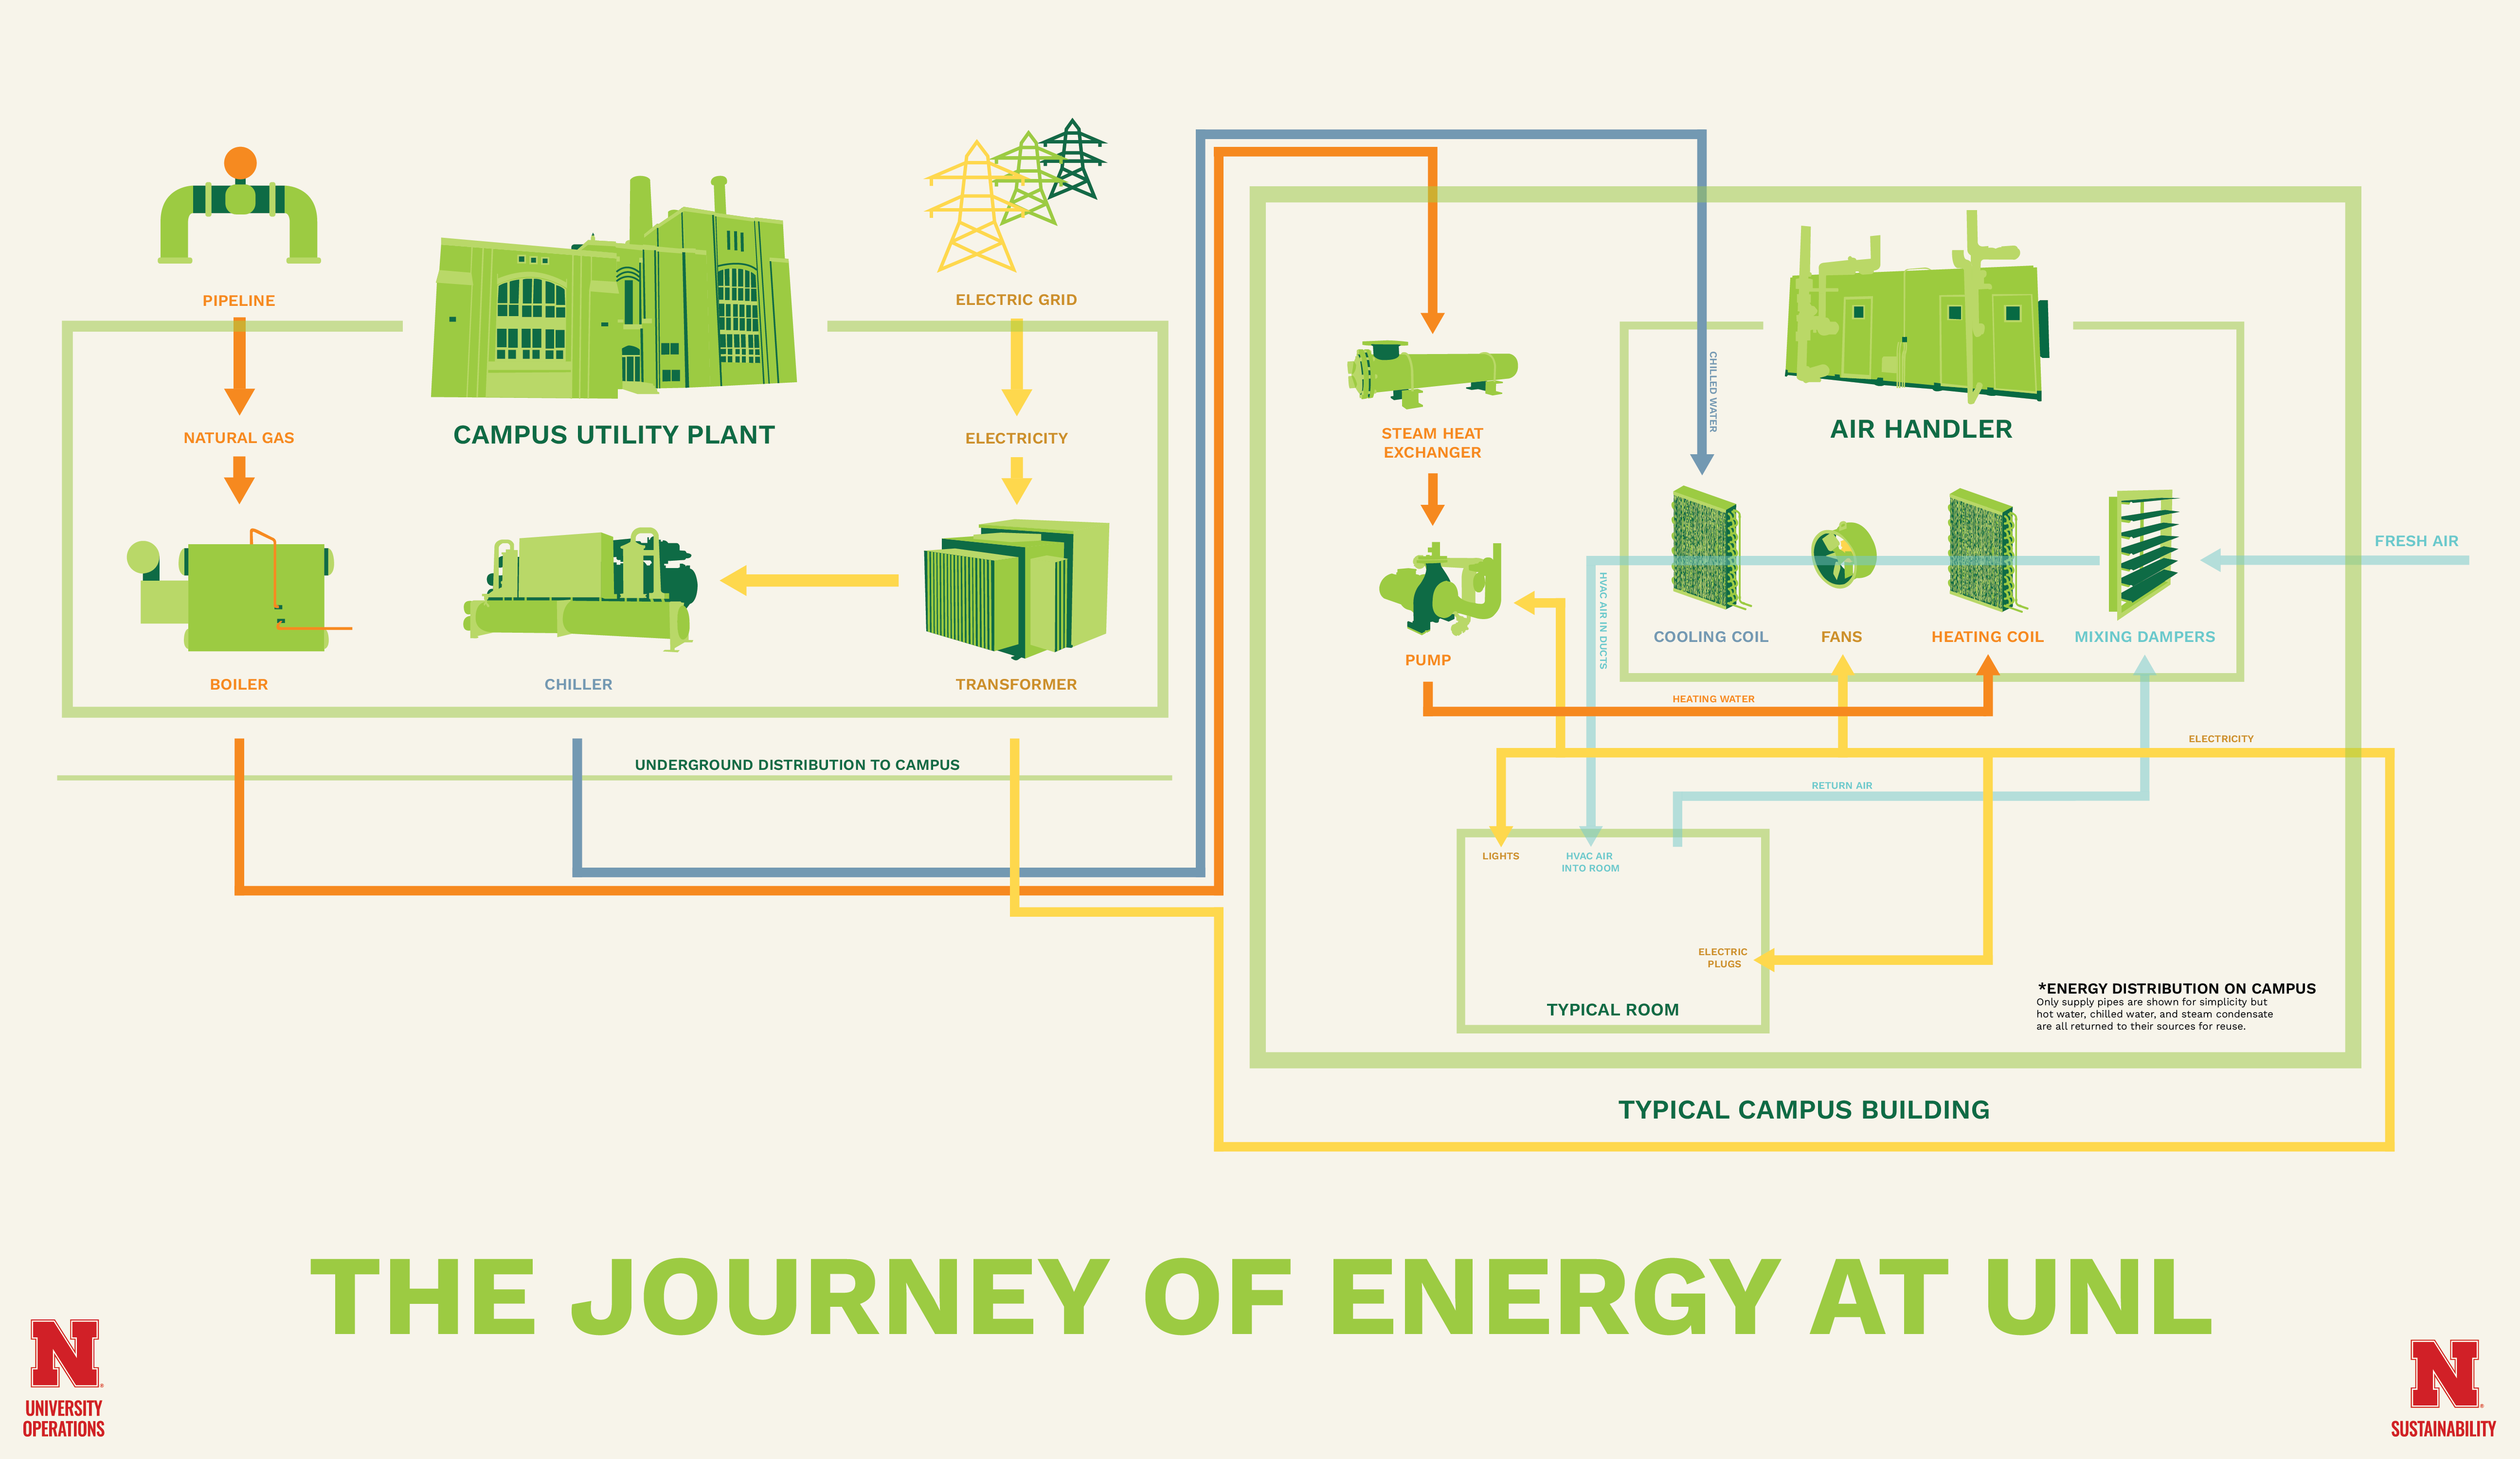 Energy is recieved from suppliers and is converted by the Campus Utility Plant to steam heat, chilled water, or electricity, which heats, cools, and powers campus spaces.